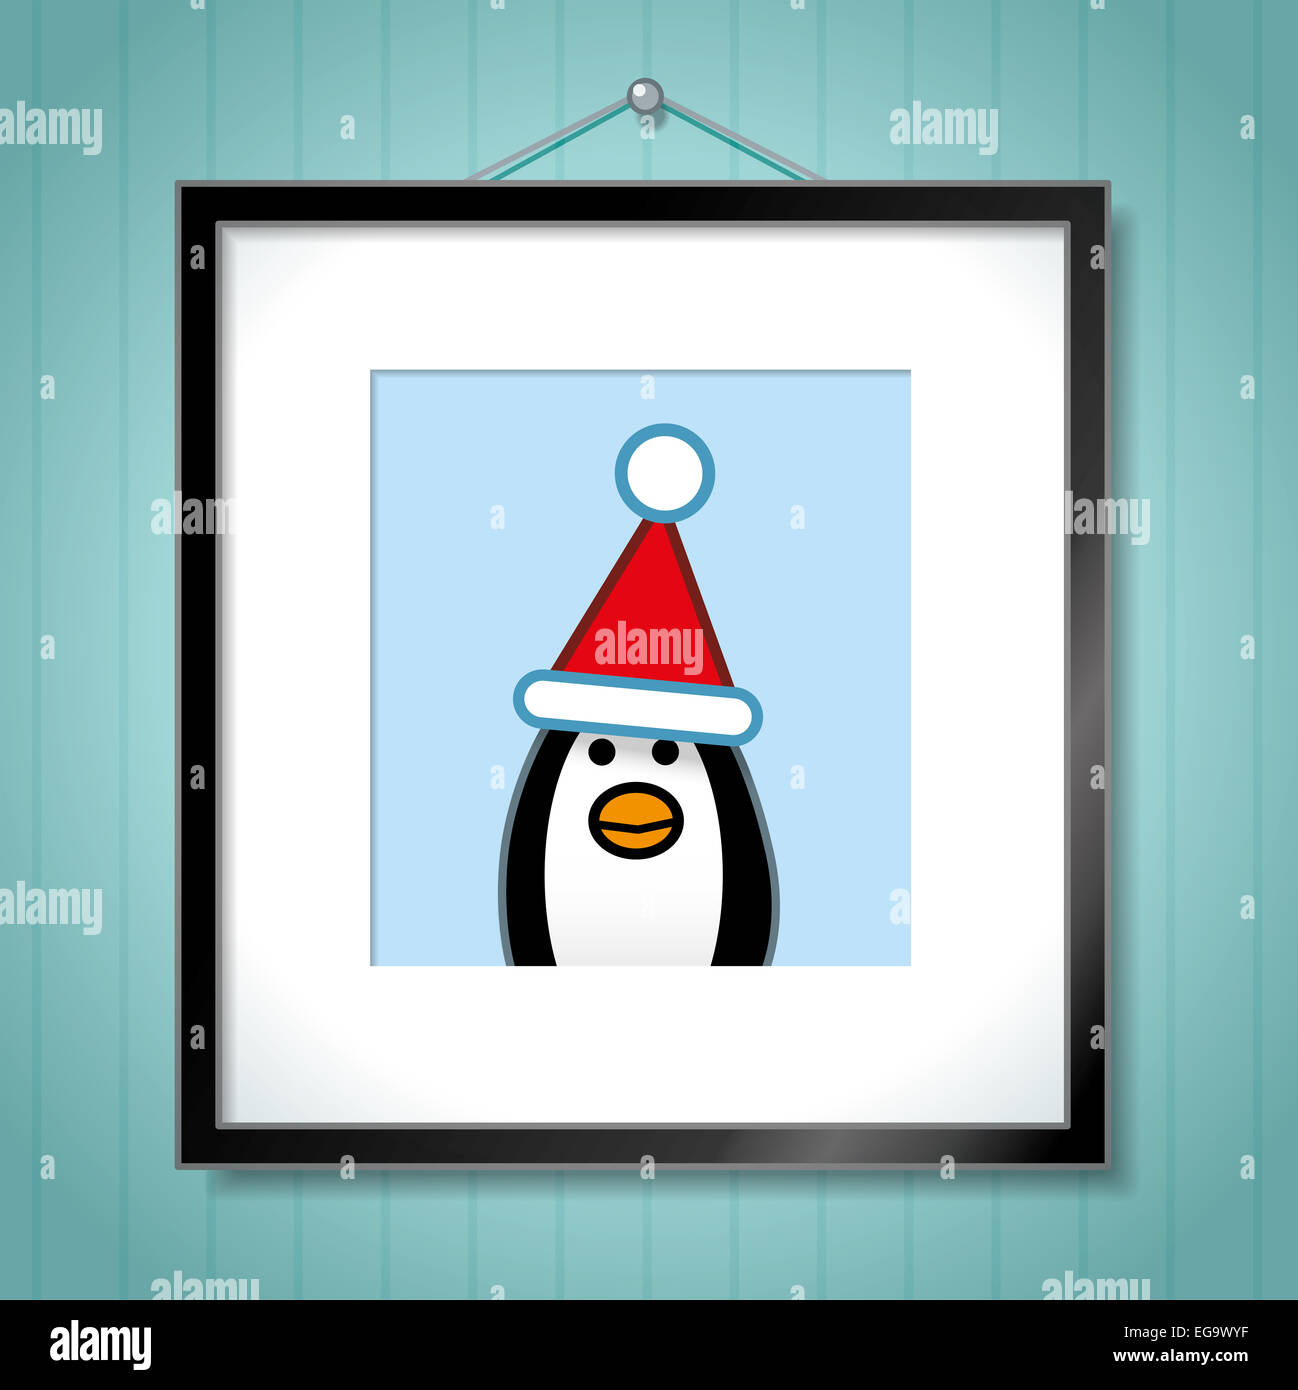 Cute Portrait of Single Penguin Wearing Santa Hat in Picture Frame Hanging on Blue Wallpaper Background Stock Photo